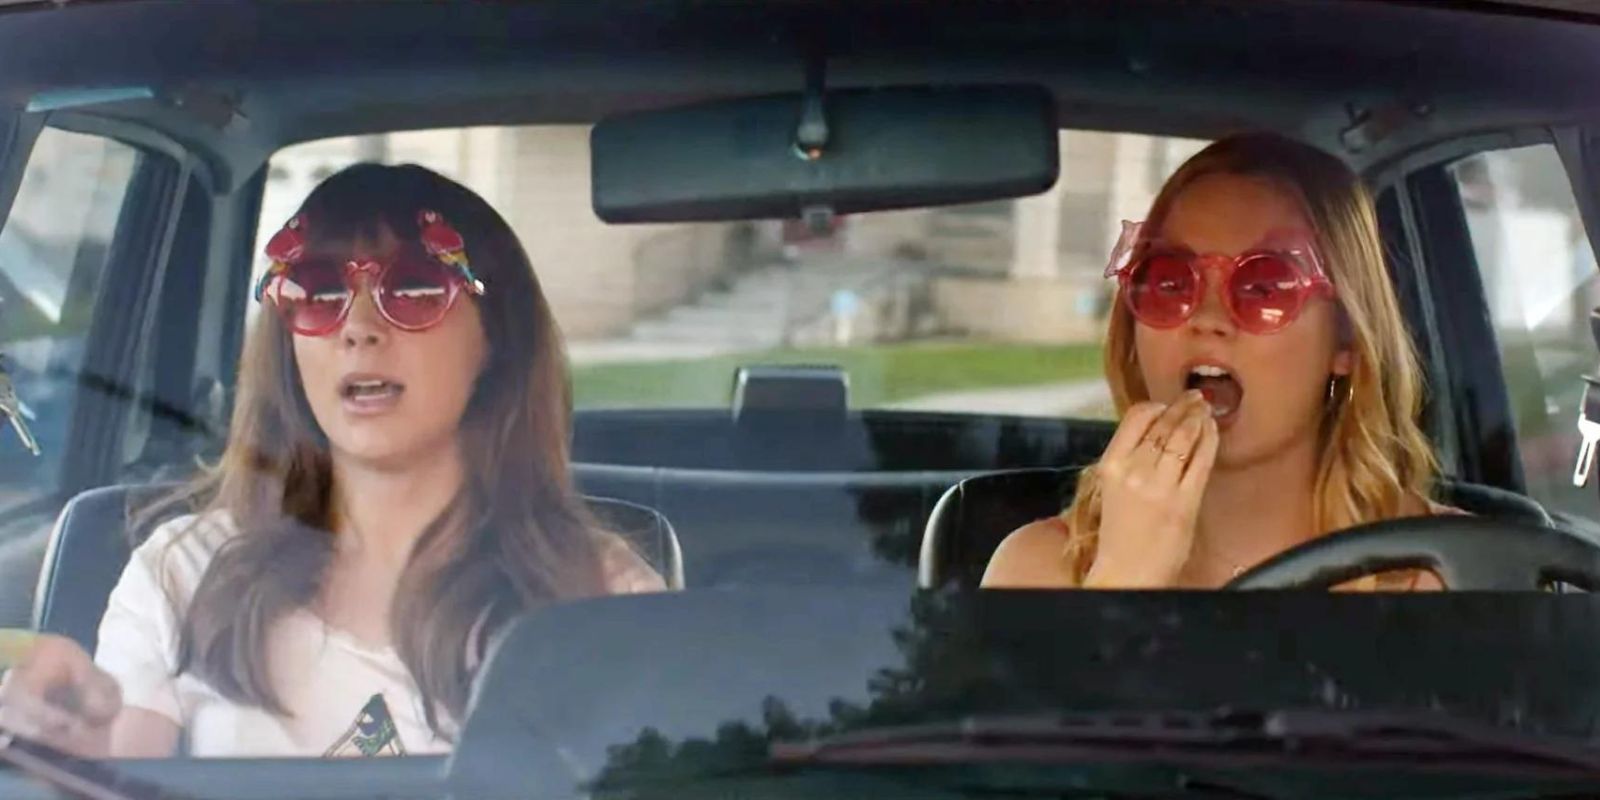 April and Clara sitting in a car with sunglasses on